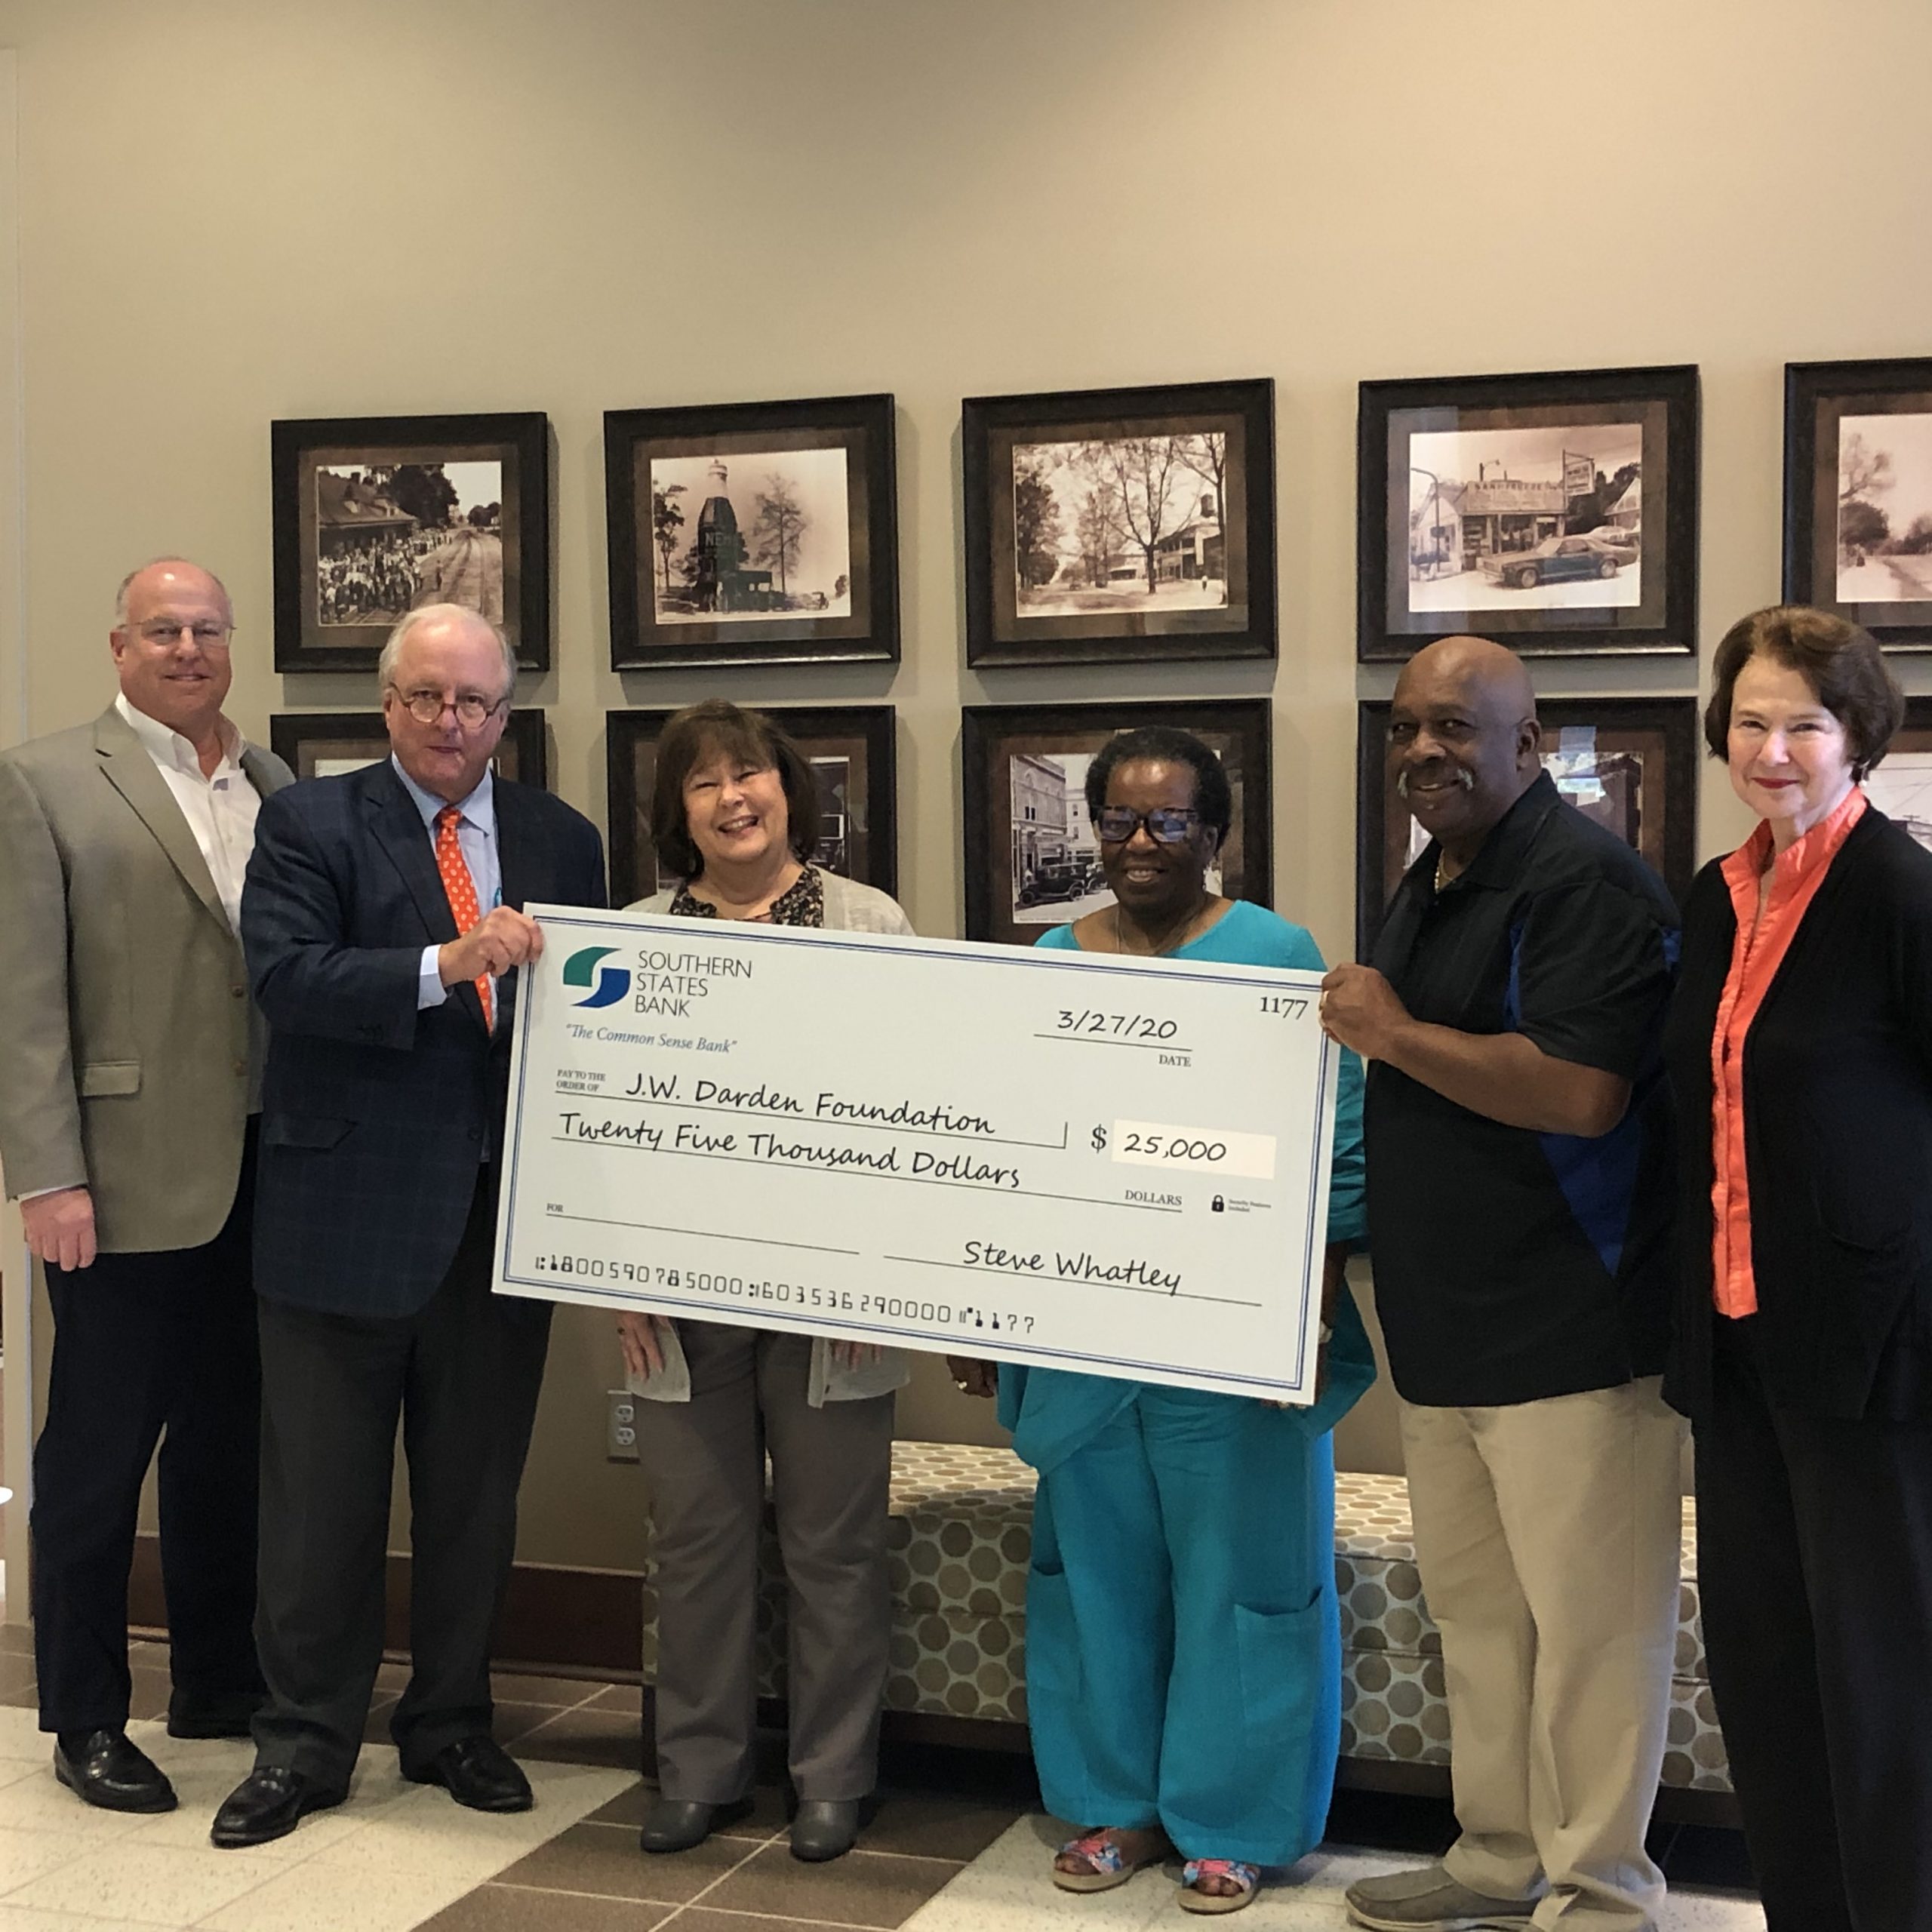 Southern States Bank makes contribution to J.W. Darden Foundation in late March